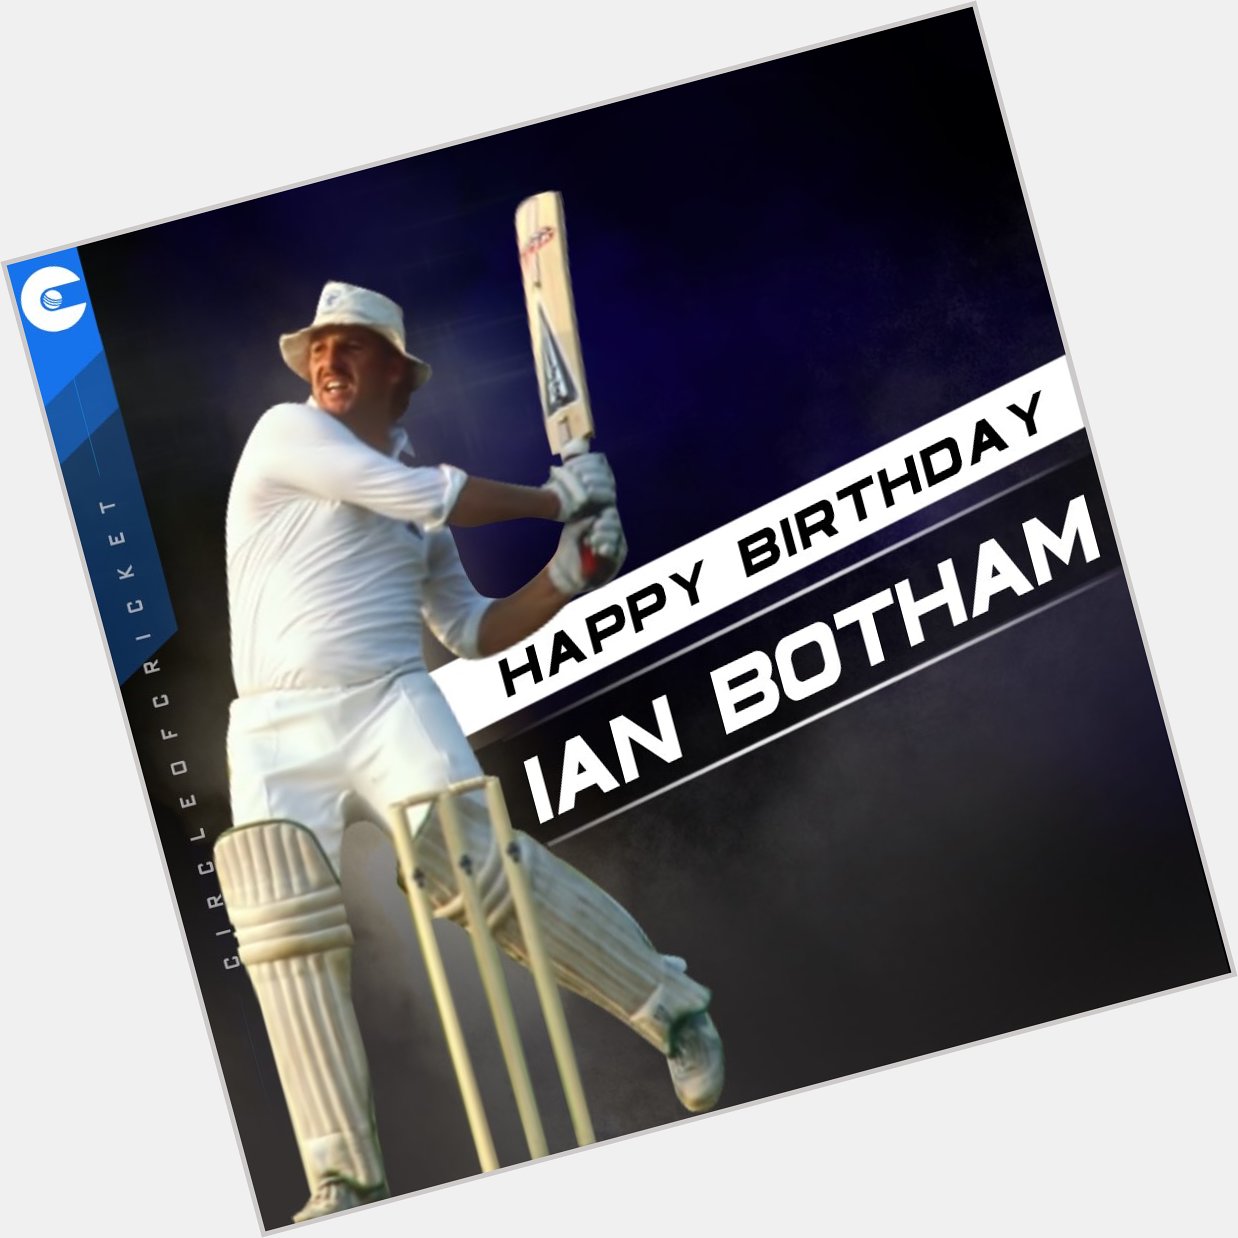 Among the greatest all-rounders to have played the game.
Happy Birthday, Sir Ian Botham 